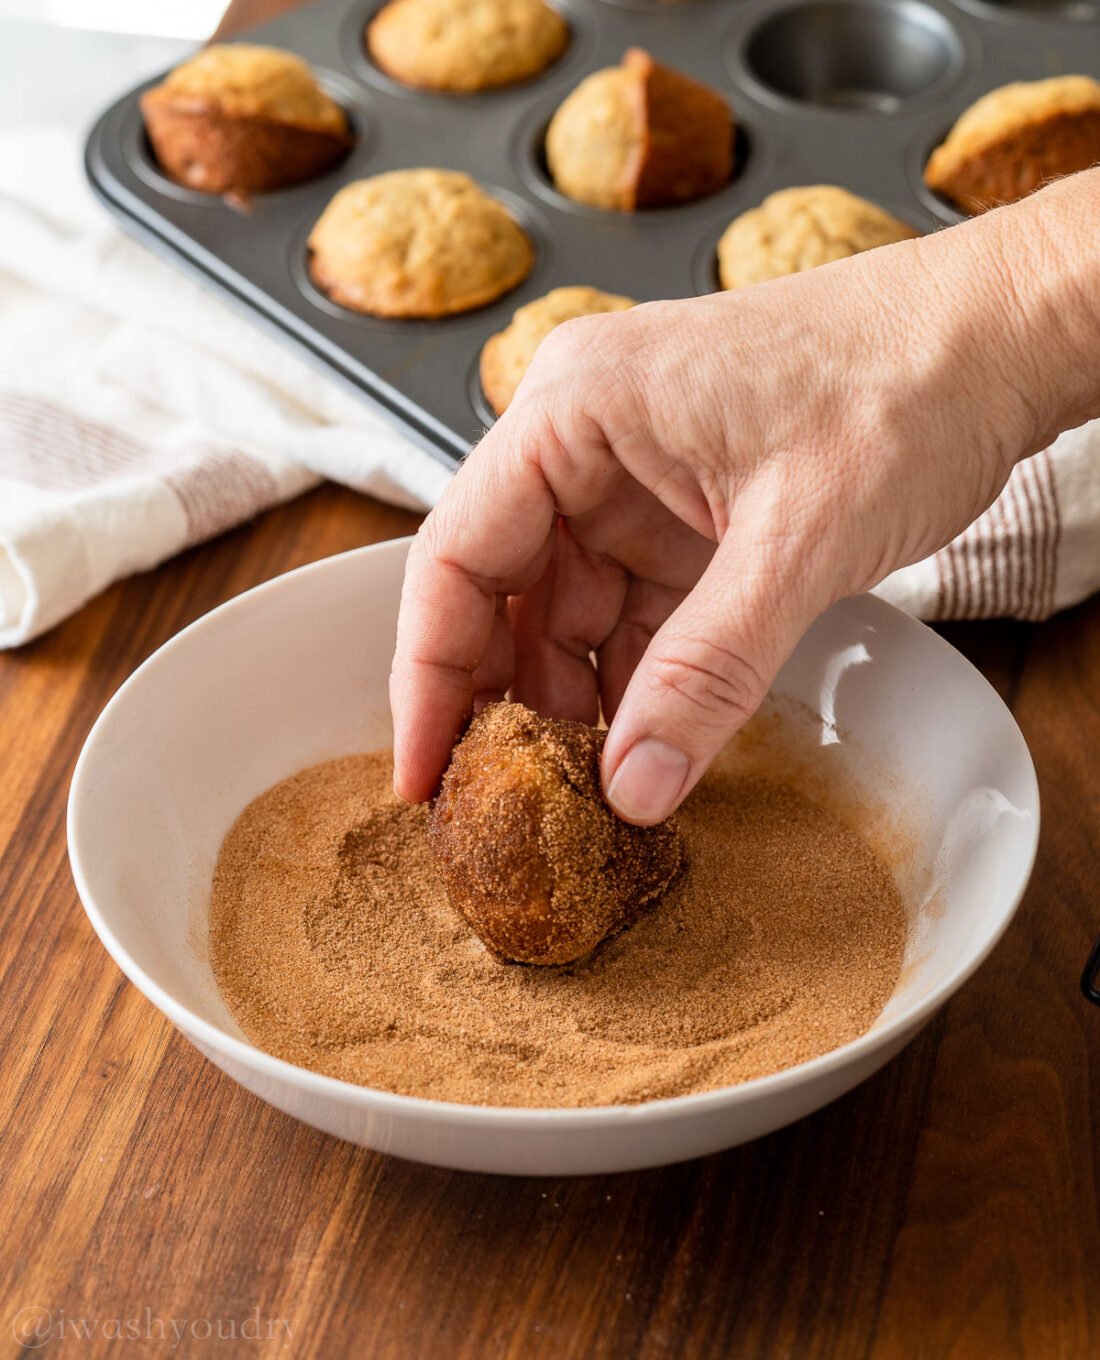 rolling muffins in cinnamon and sugar mixture in white bowl.